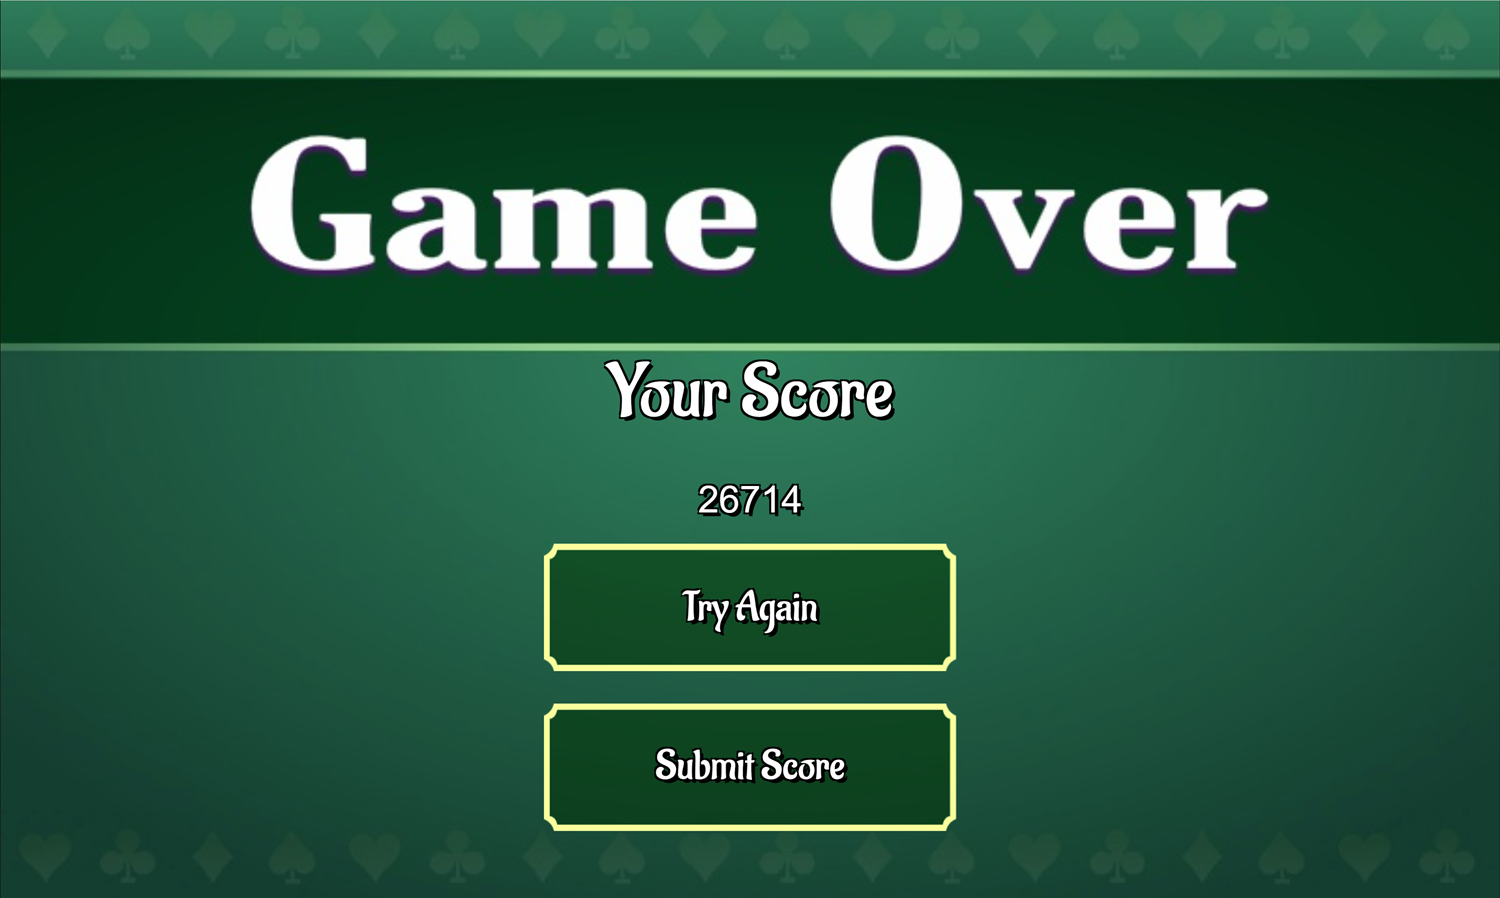 Classic Solitaire Game Over Screen Screenshot.